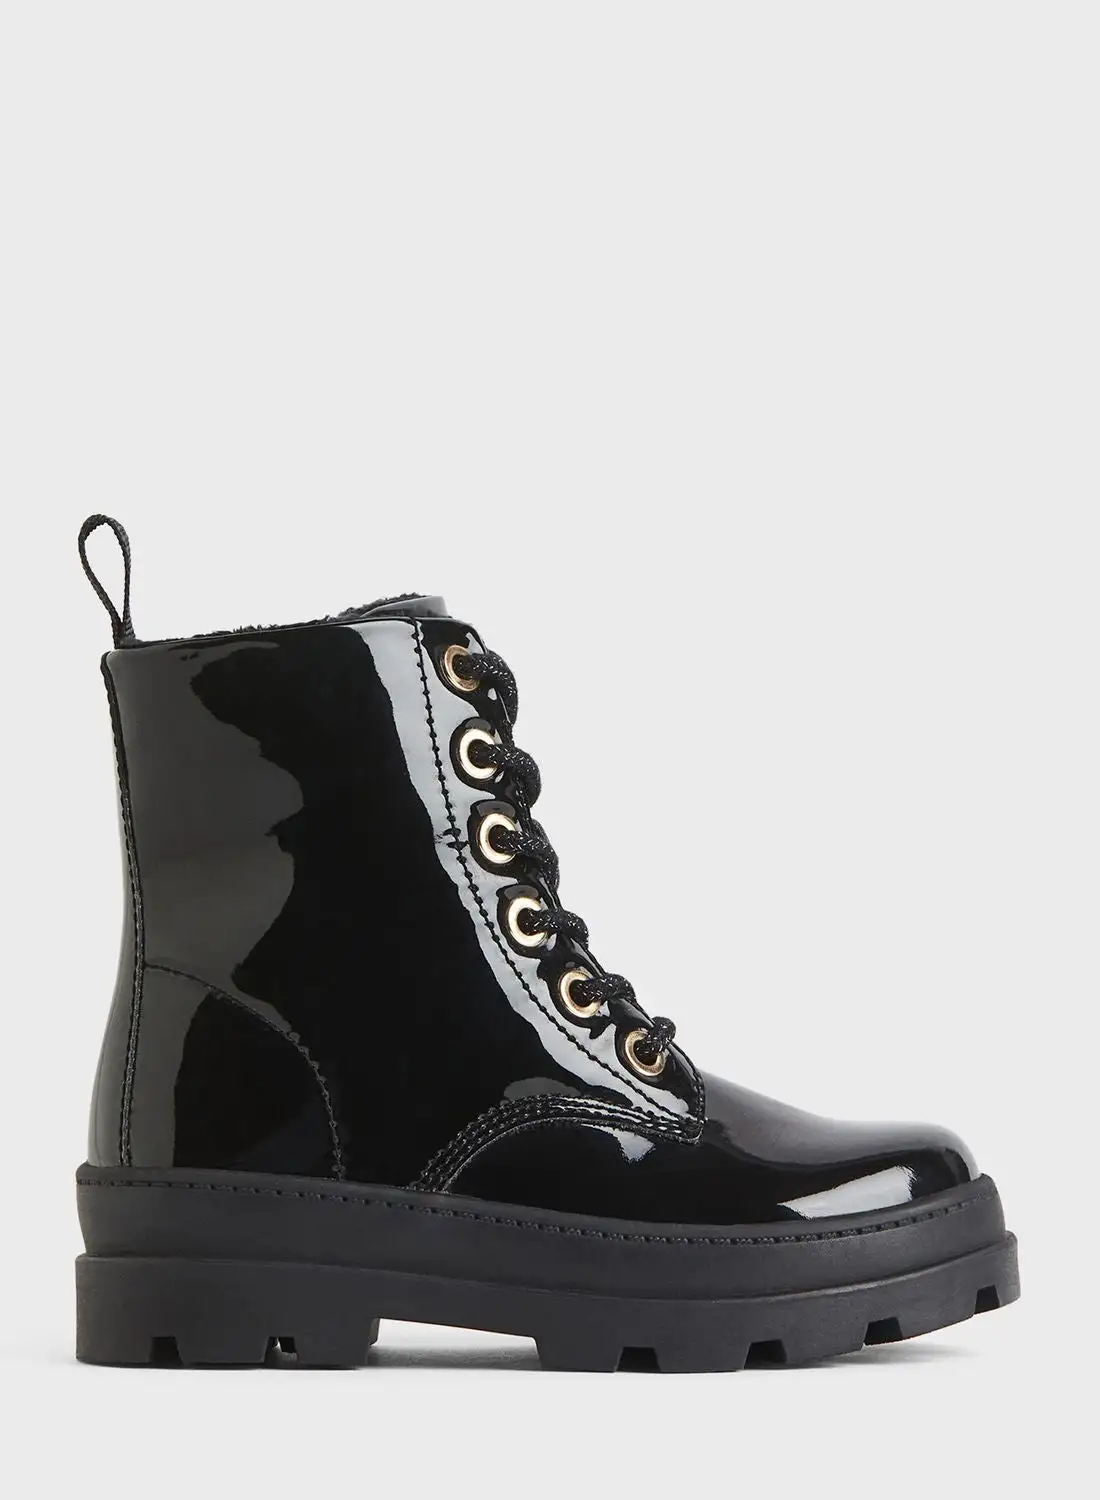 H&M Kids Warm Lined Lace Up Boots